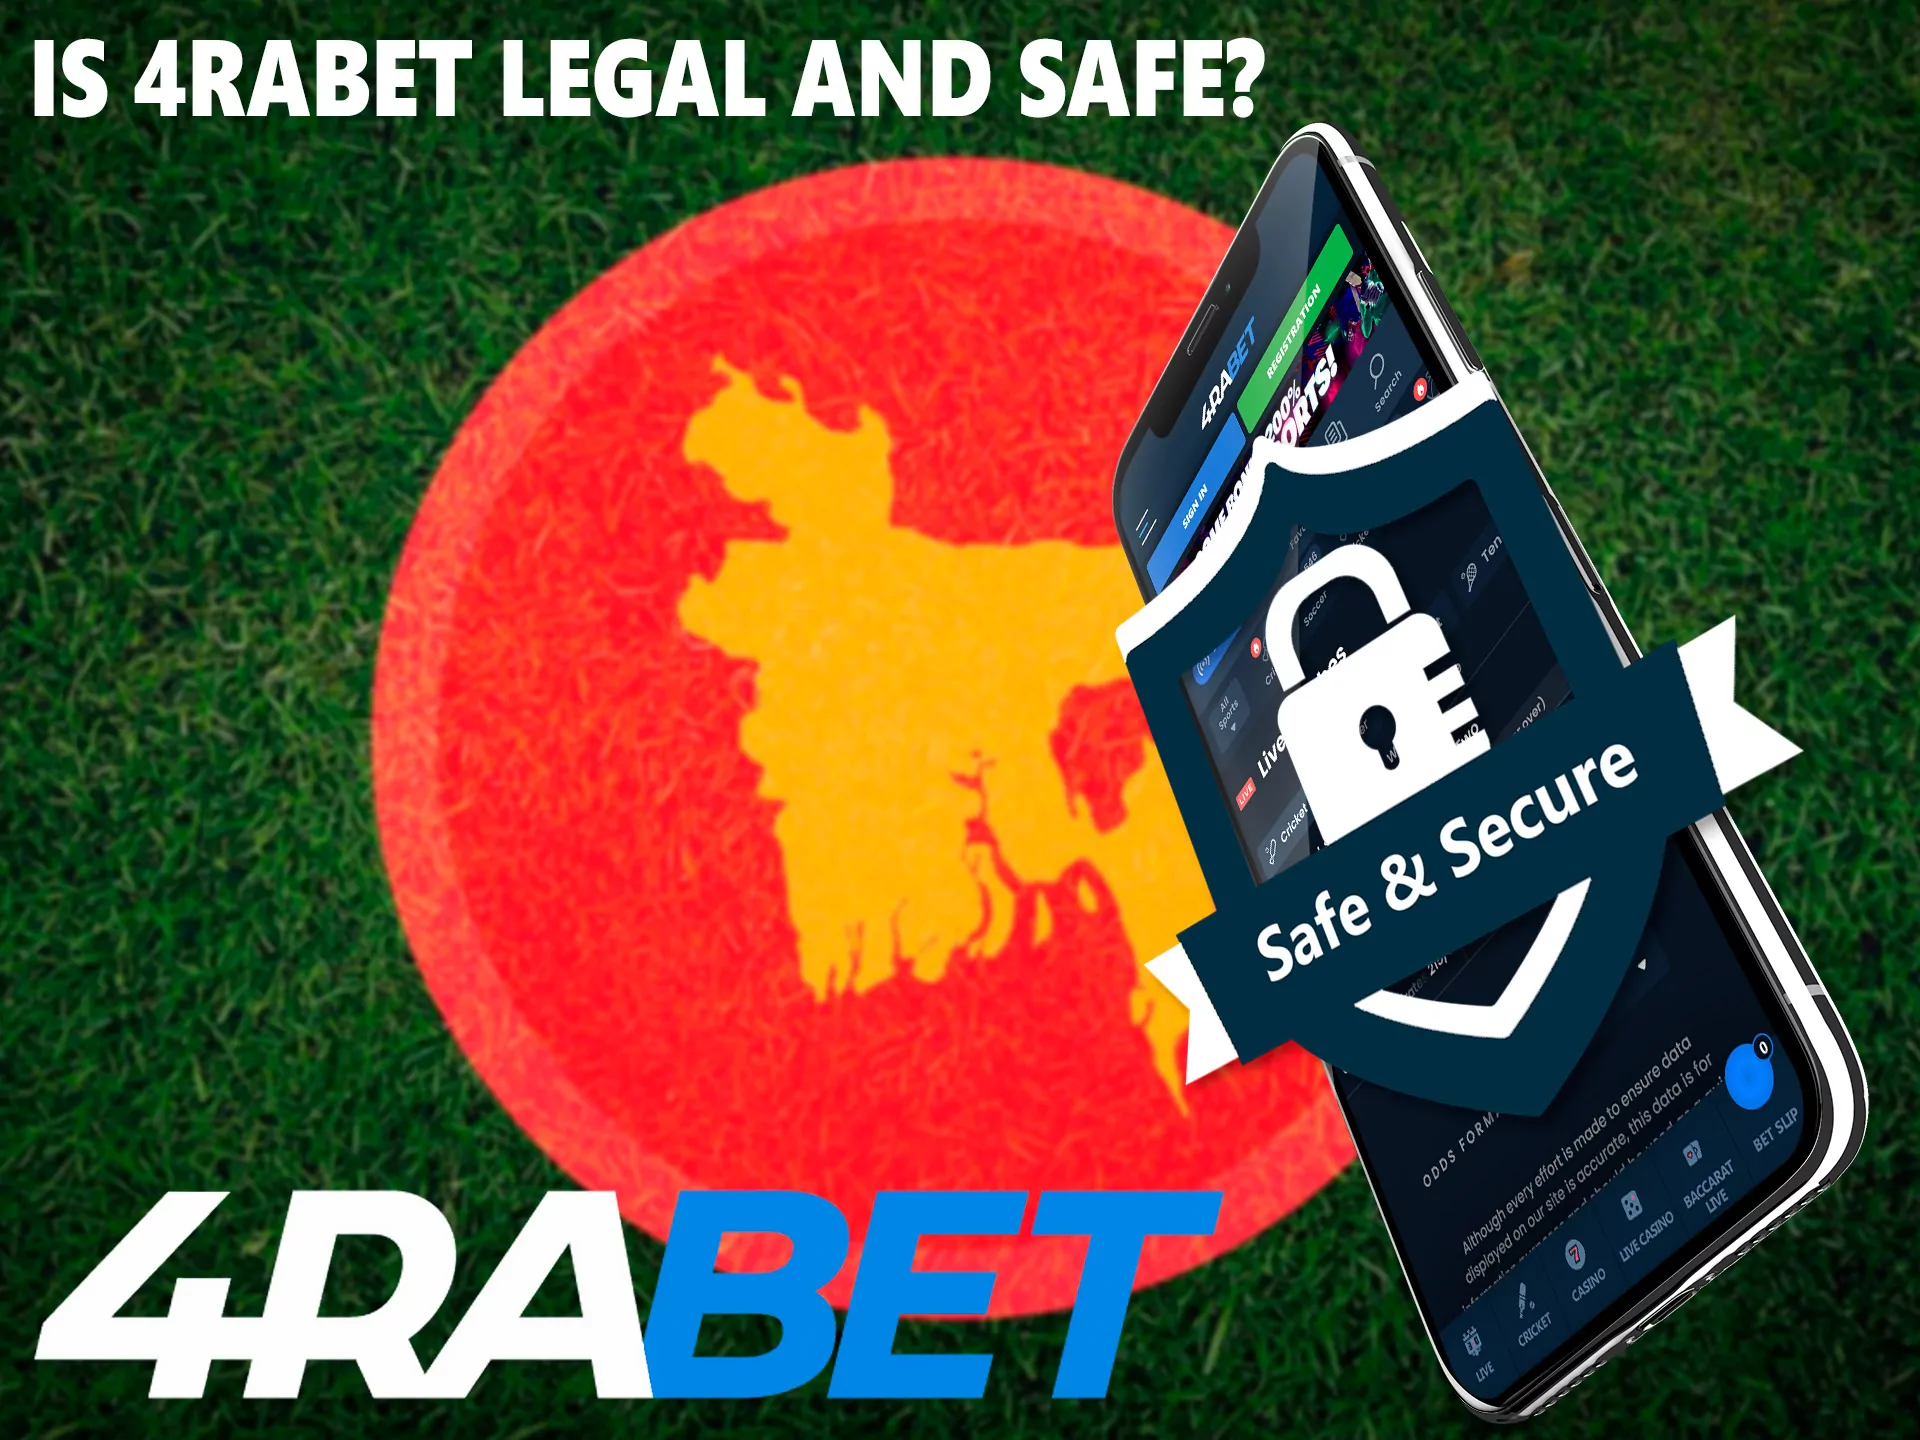 Land-based gambling is prohibited in Bangladesh, but it is safe to bet on the 4rabet website.